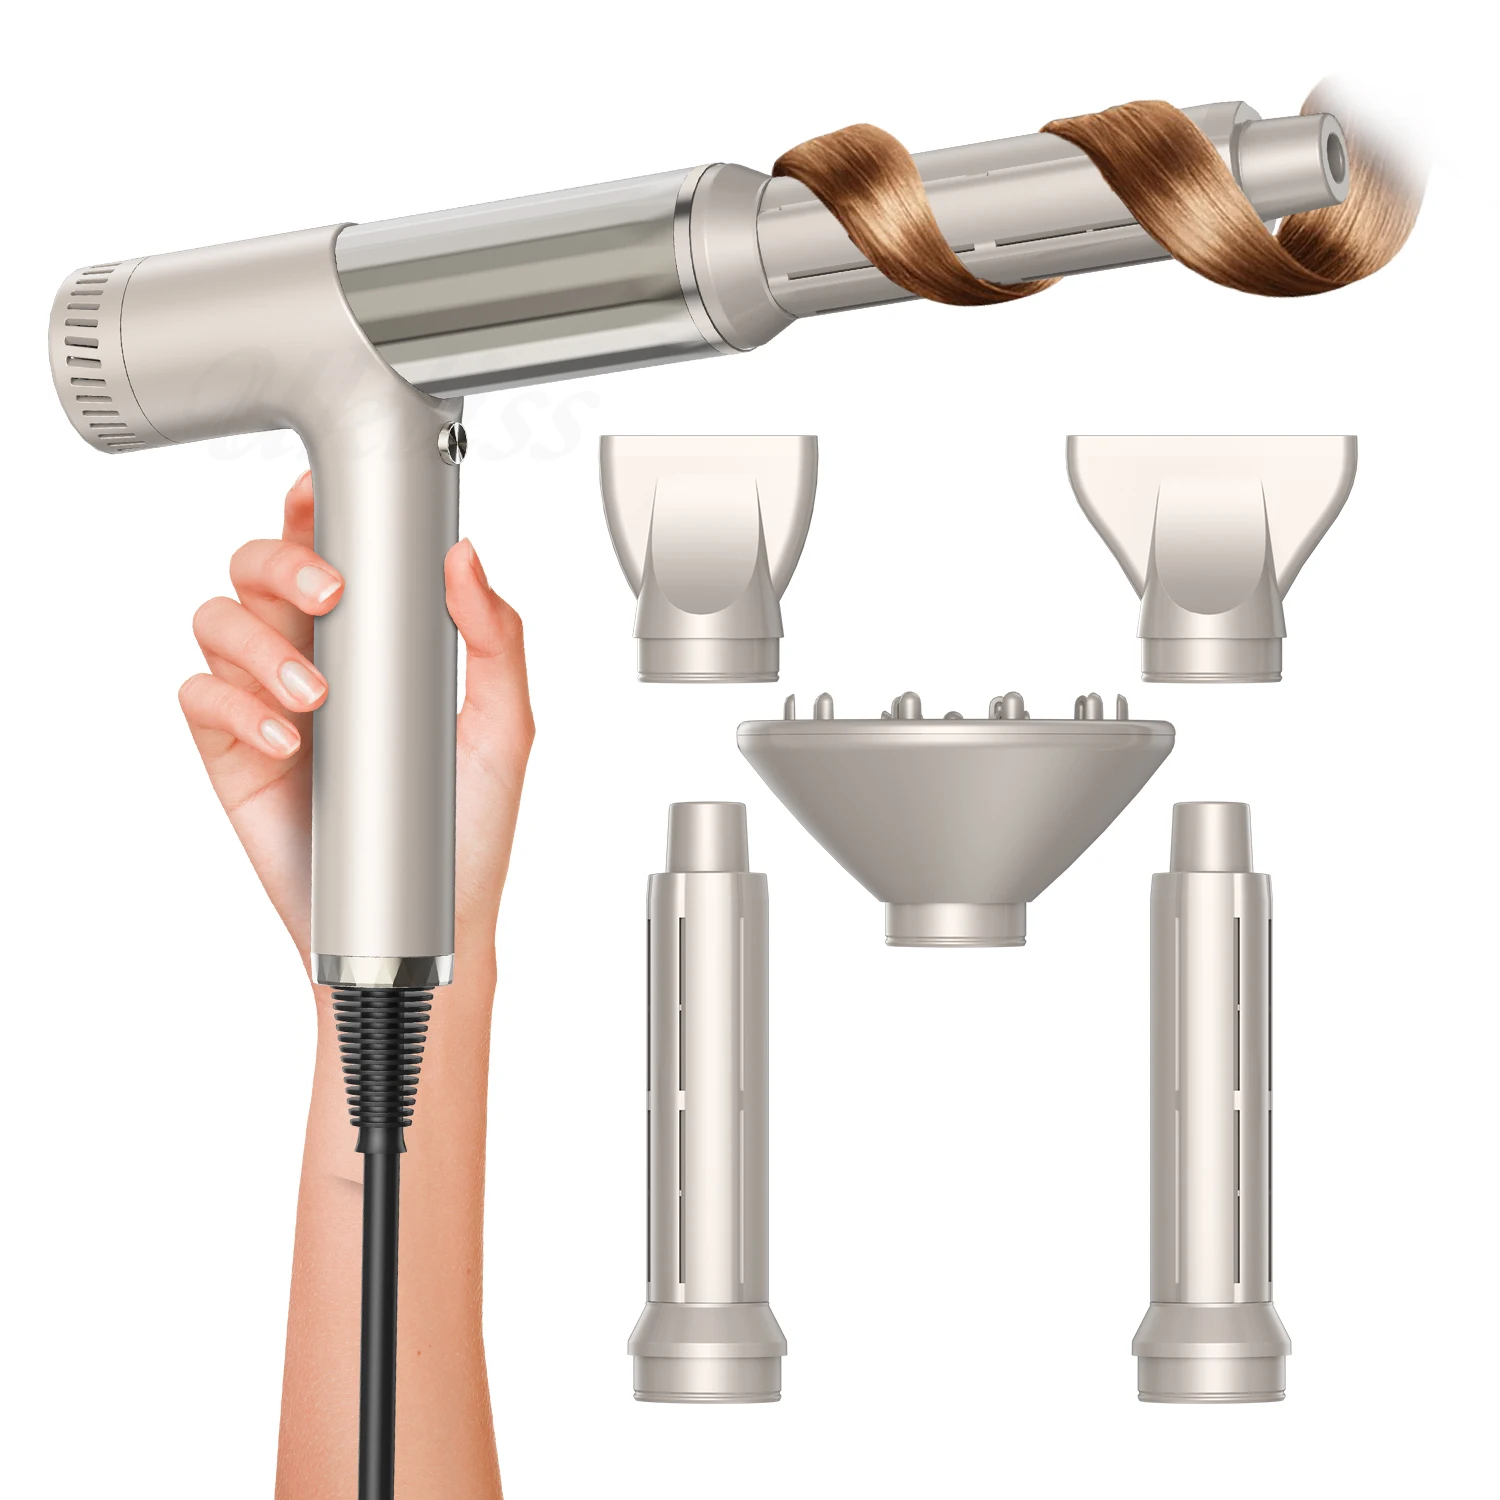 5 In 1 High Speed Hair Dryer Negative Ionic Blow Dryer for Fast Drying with Diffuser and Curling Attachment Hair Dryers Curler